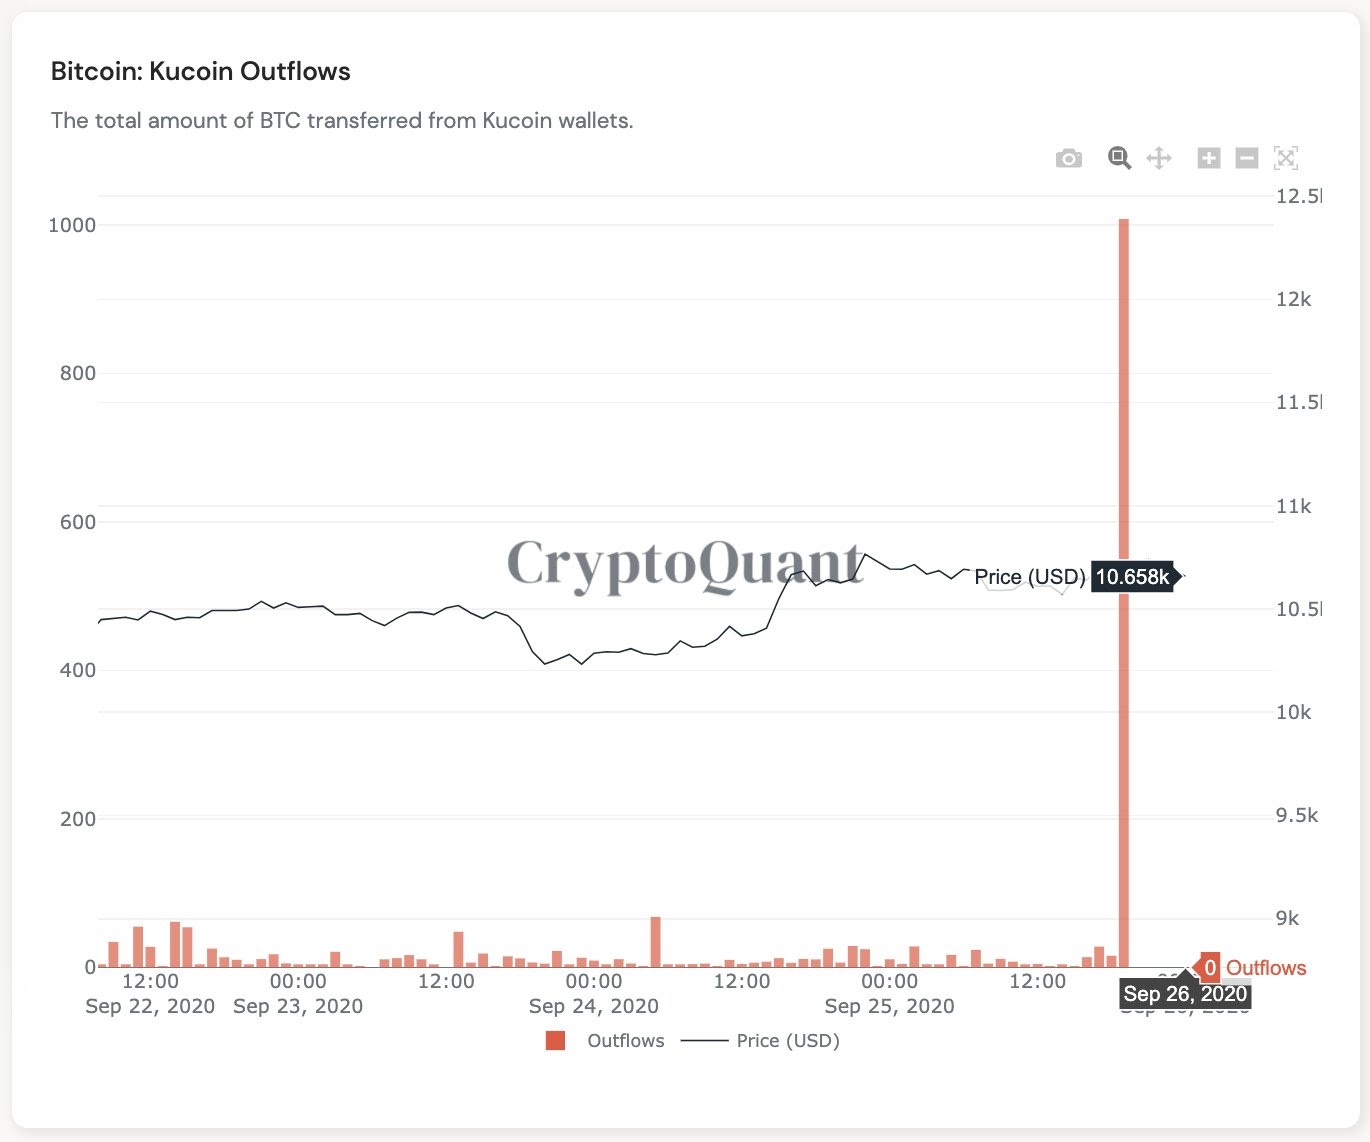 Bitcoin outflows on Kucoin after the hack